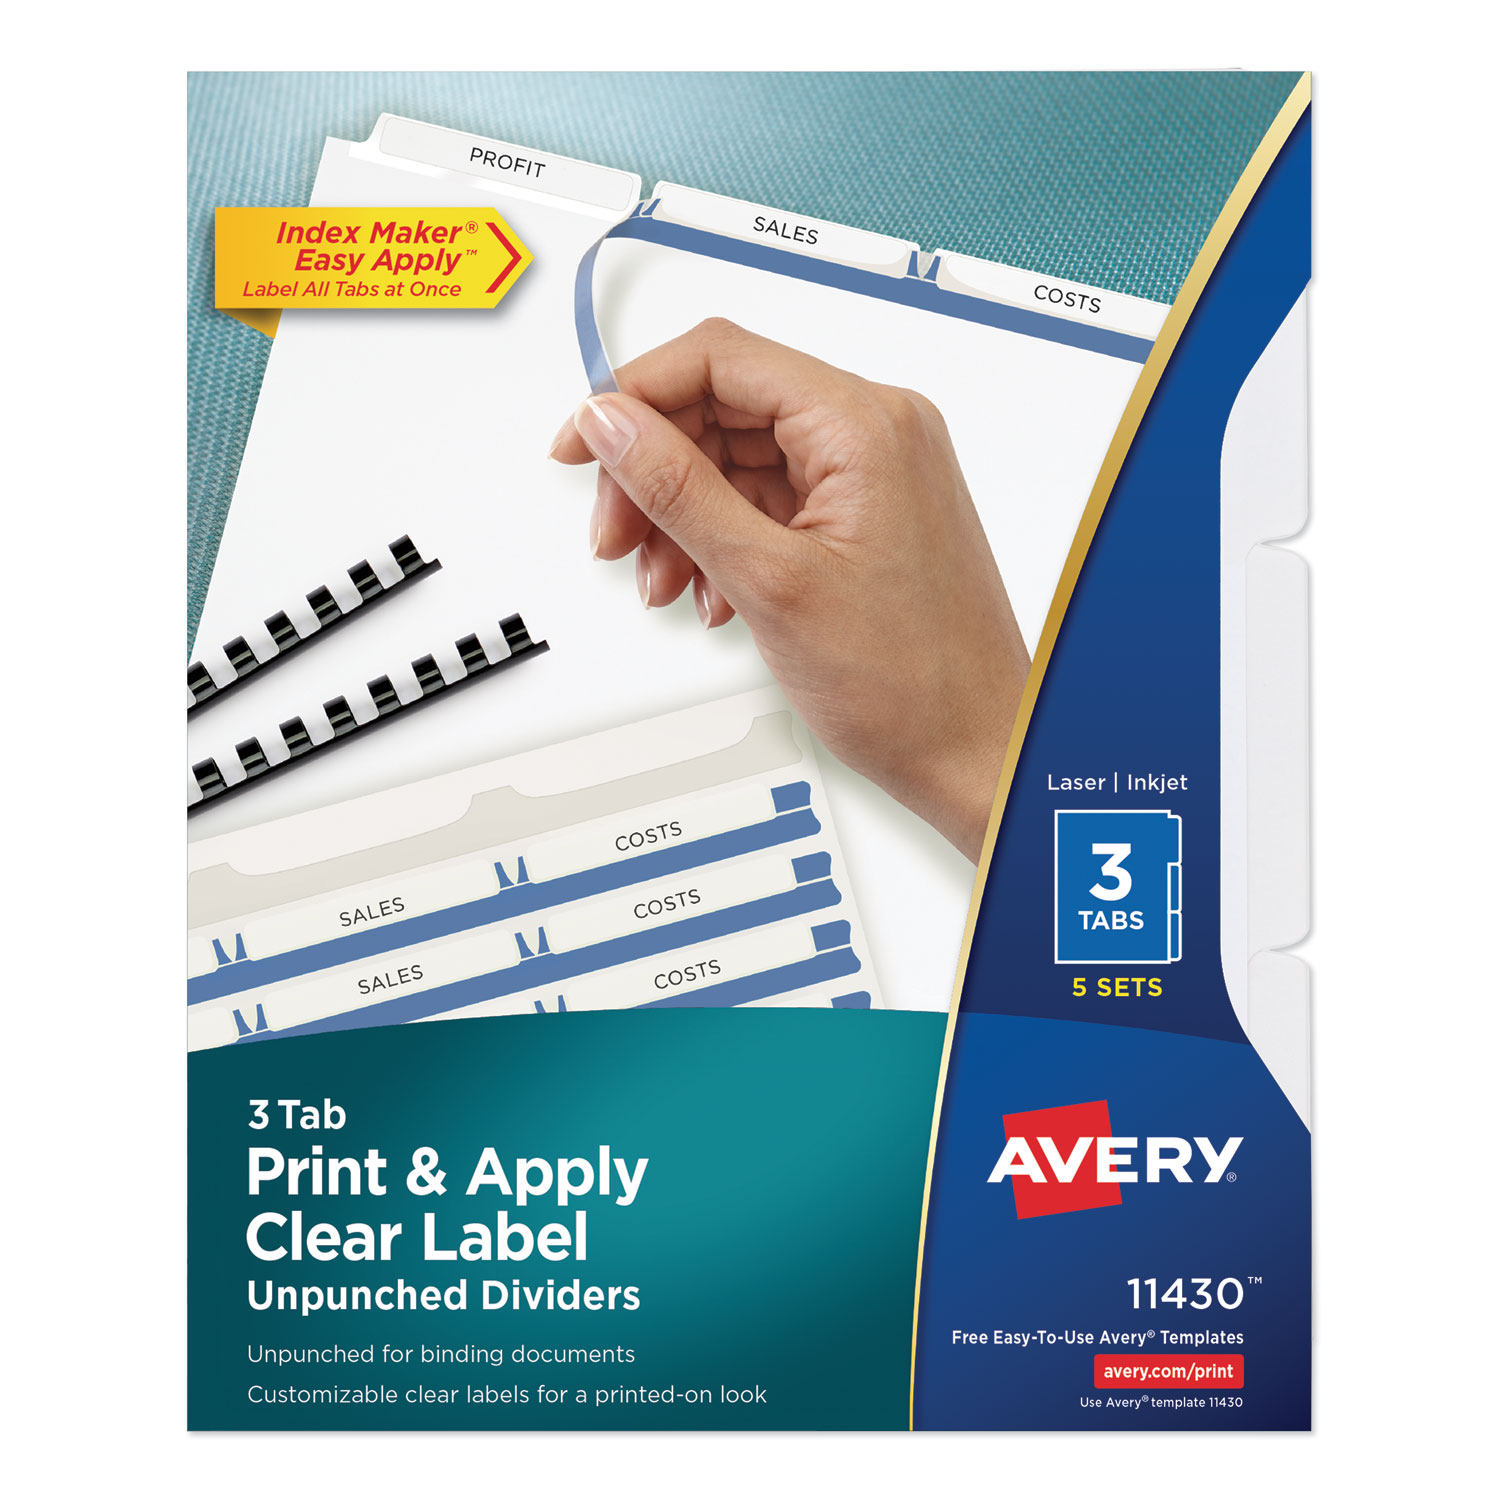  Avery 11430 Print and Apply Index Maker Clear Label Unpunched Dividers, 3Tab, Letter, 5 Sets (AVE11430) 